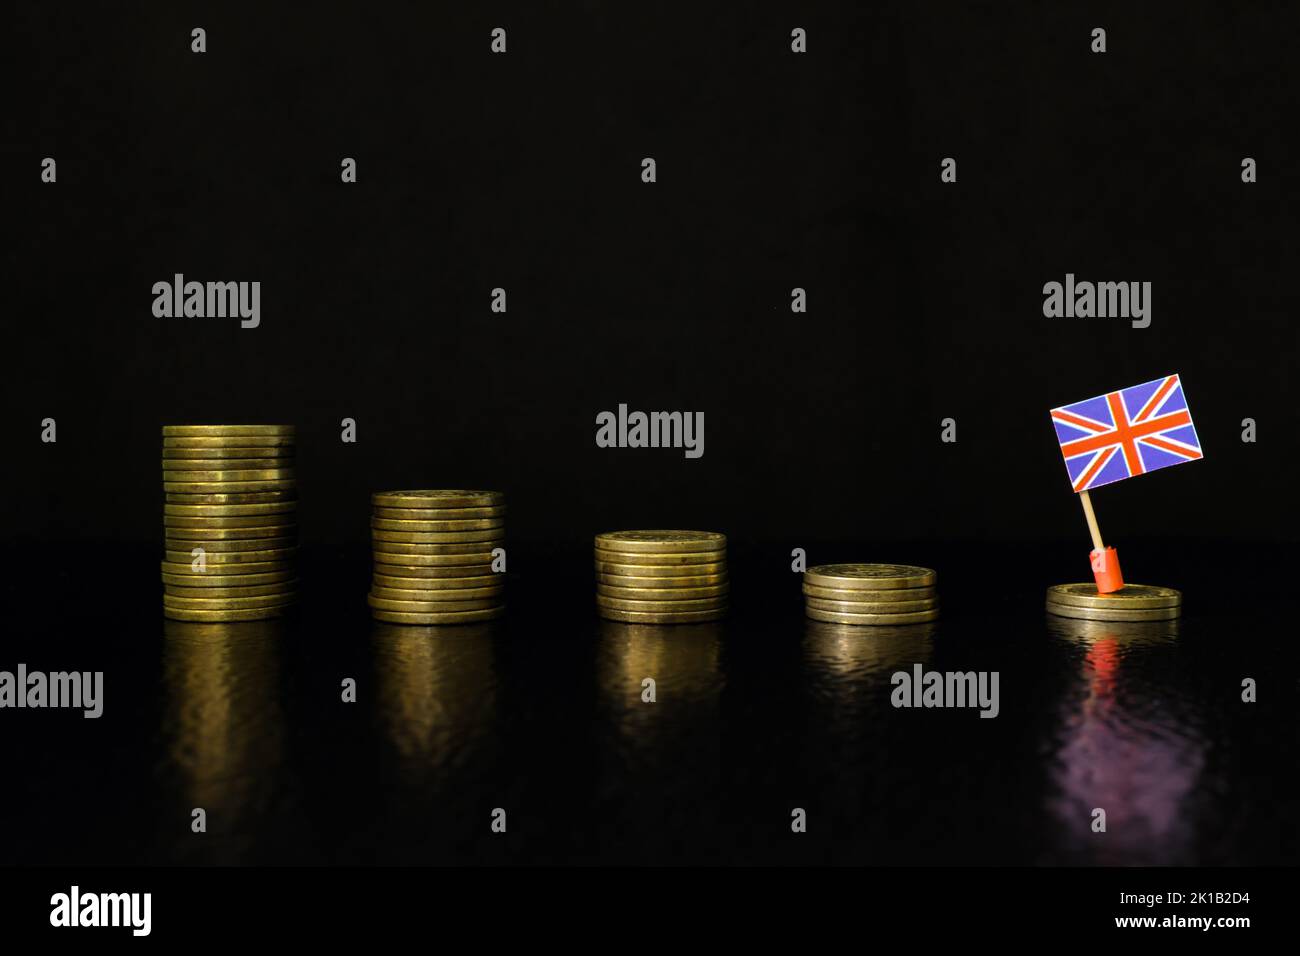 United Kingdom economic recession, financial crisis and currency depreciation concept. UK flag in decreasing stack of coins in dark black background. Stock Photo